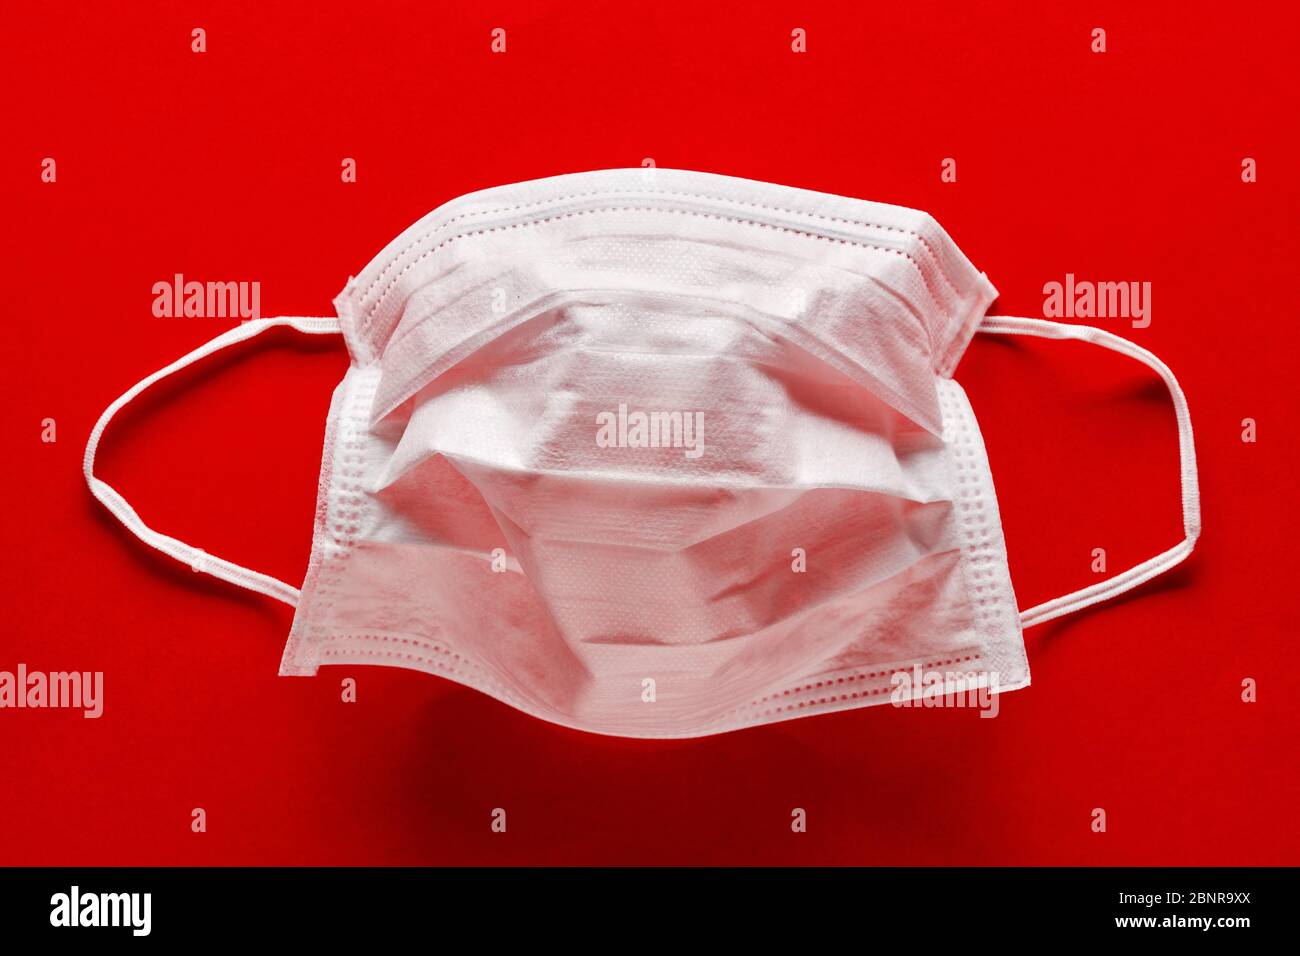 Medical or surgical mask for protection against virus diseases on red background. COVID-19 or corona virus protection. Stock Photo